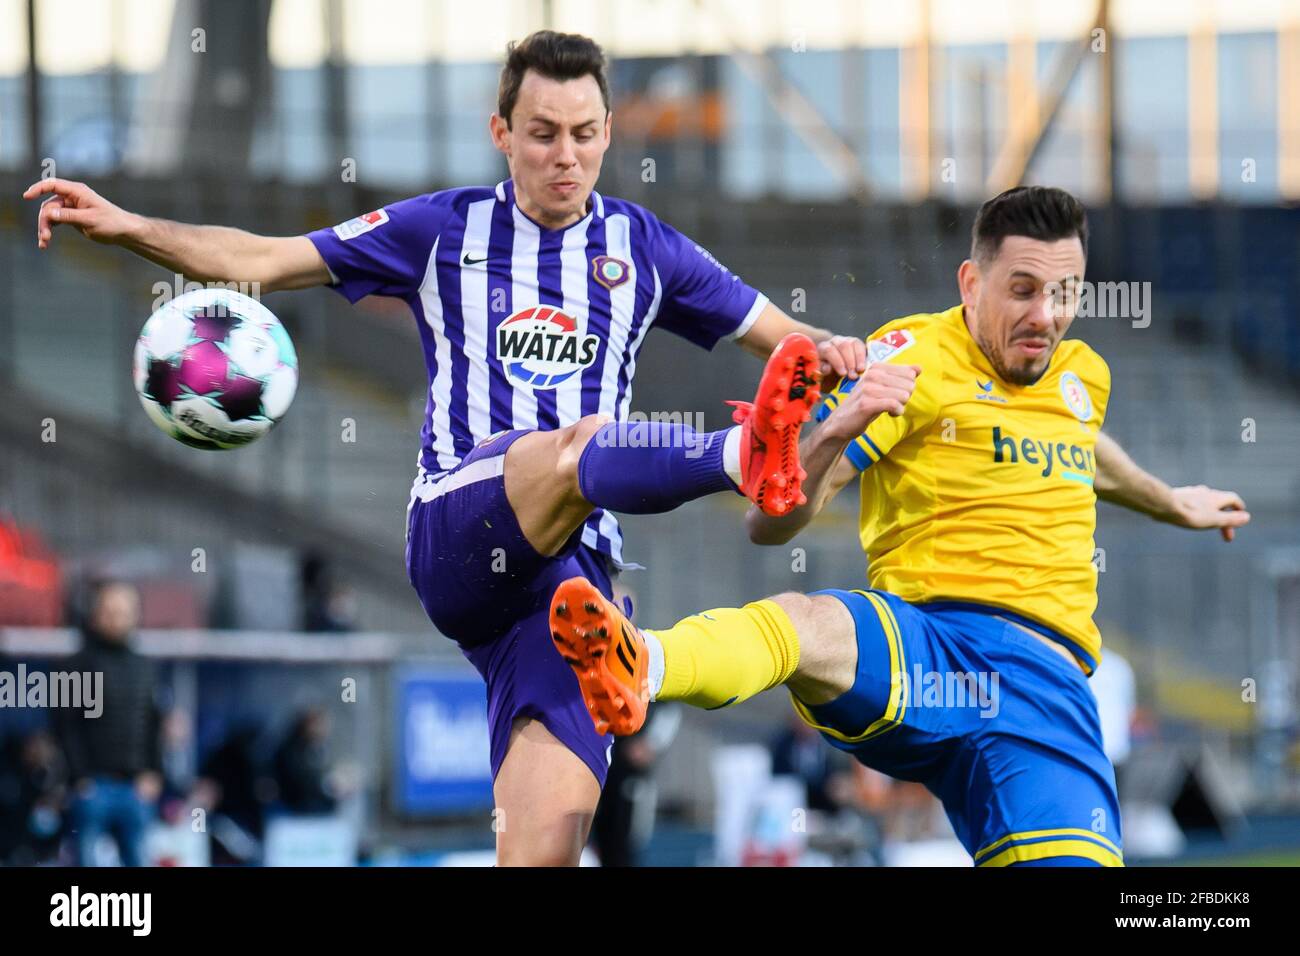 Brunswick, Germany. 23rd Apr, 2021. Football: 2. Bundesliga, Eintracht Braunschweig - Erzgebirge Aue, Matchday 31 at Eintracht-Stadion. Braunschweig's Marcel Bär (r) plays against Aue's Clemens Fandrich. Credit: Swen Pförtner/dpa - IMPORTANT NOTE: In accordance with the regulations of the DFL Deutsche Fußball Liga and/or the DFB Deutscher Fußball-Bund, it is prohibited to use or have used photographs taken in the stadium and/or of the match in the form of sequence pictures and/or video-like photo series./dpa/Alamy Live News Stock Photo